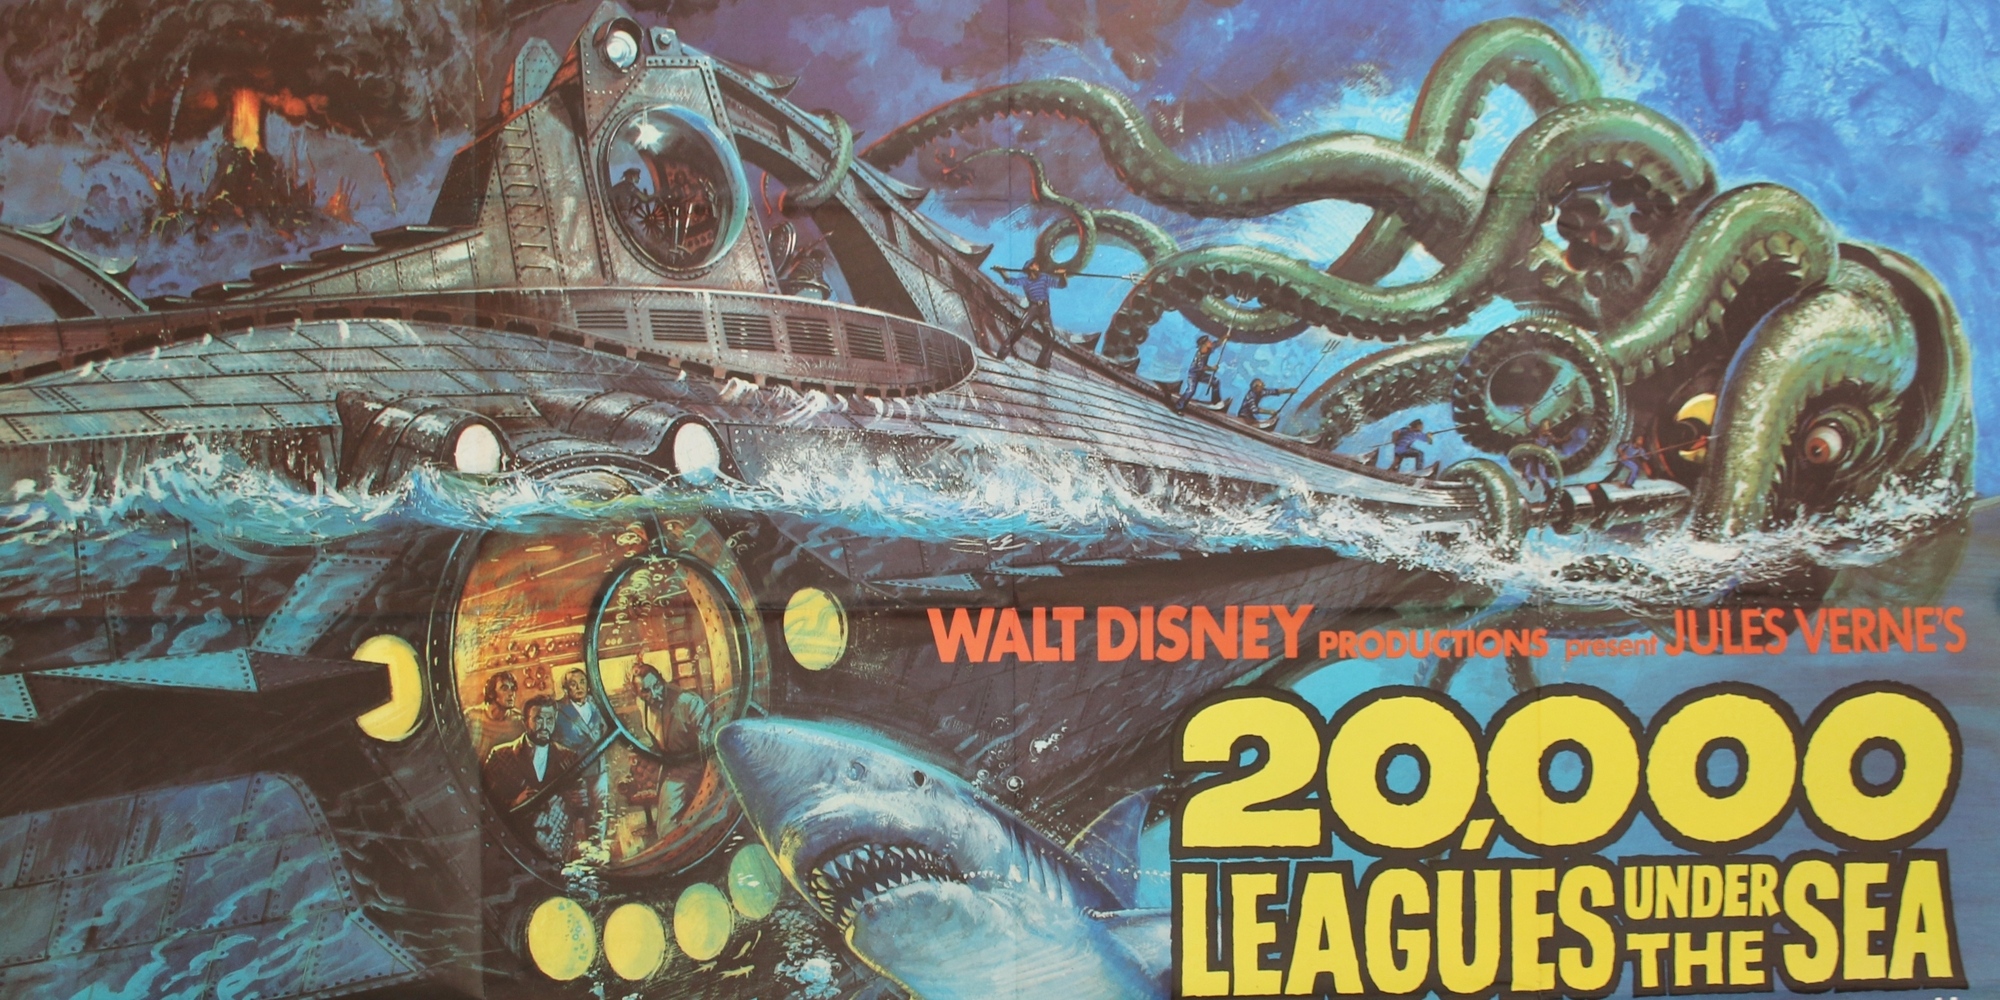 20,000 Leagues under the sea - Disney movie poster